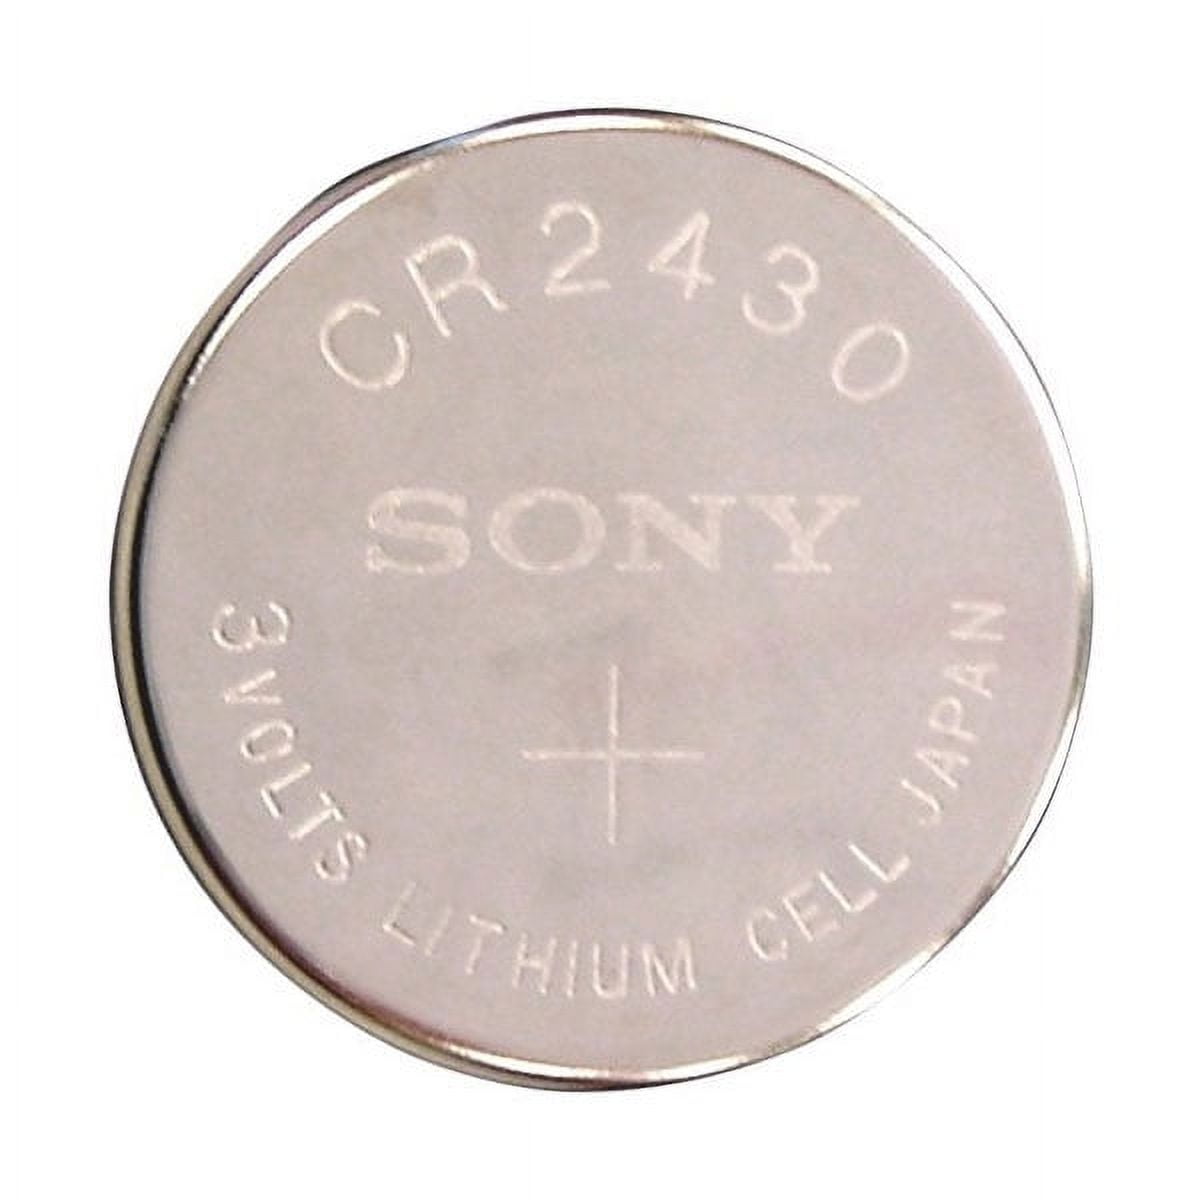 2 Sony CR 2430 CR2430 Lithium 3-Volt Coin Cell Batteries - Replaced Murata